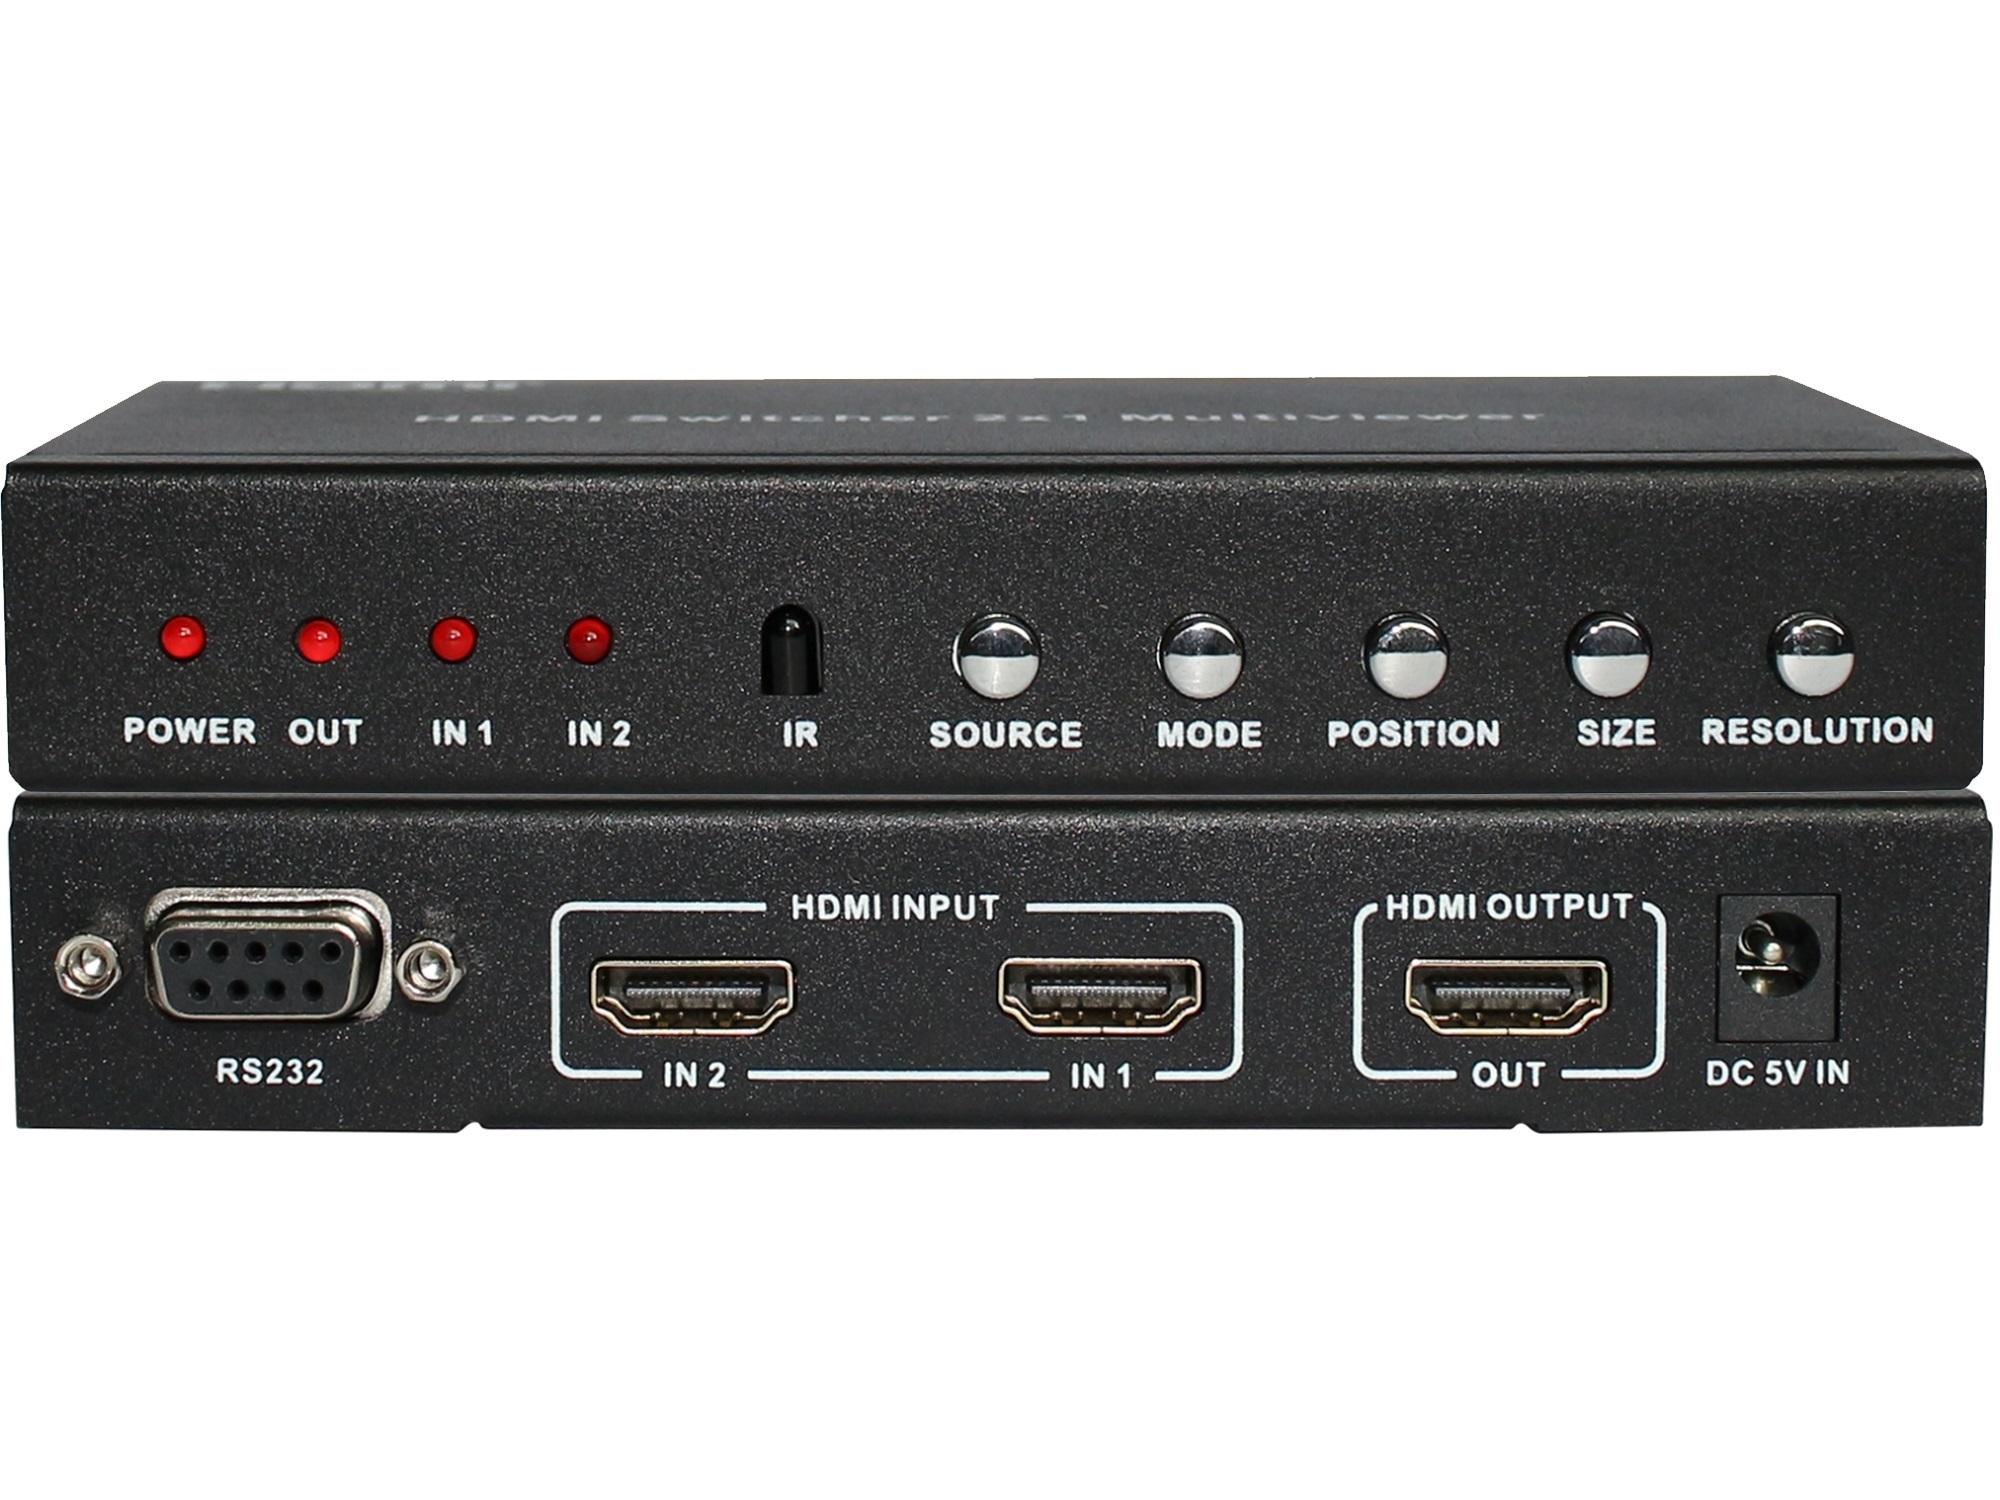 ANI-PIP-LITE 2x1 HDMI Multiviewer with PIP by A-NeuVideo